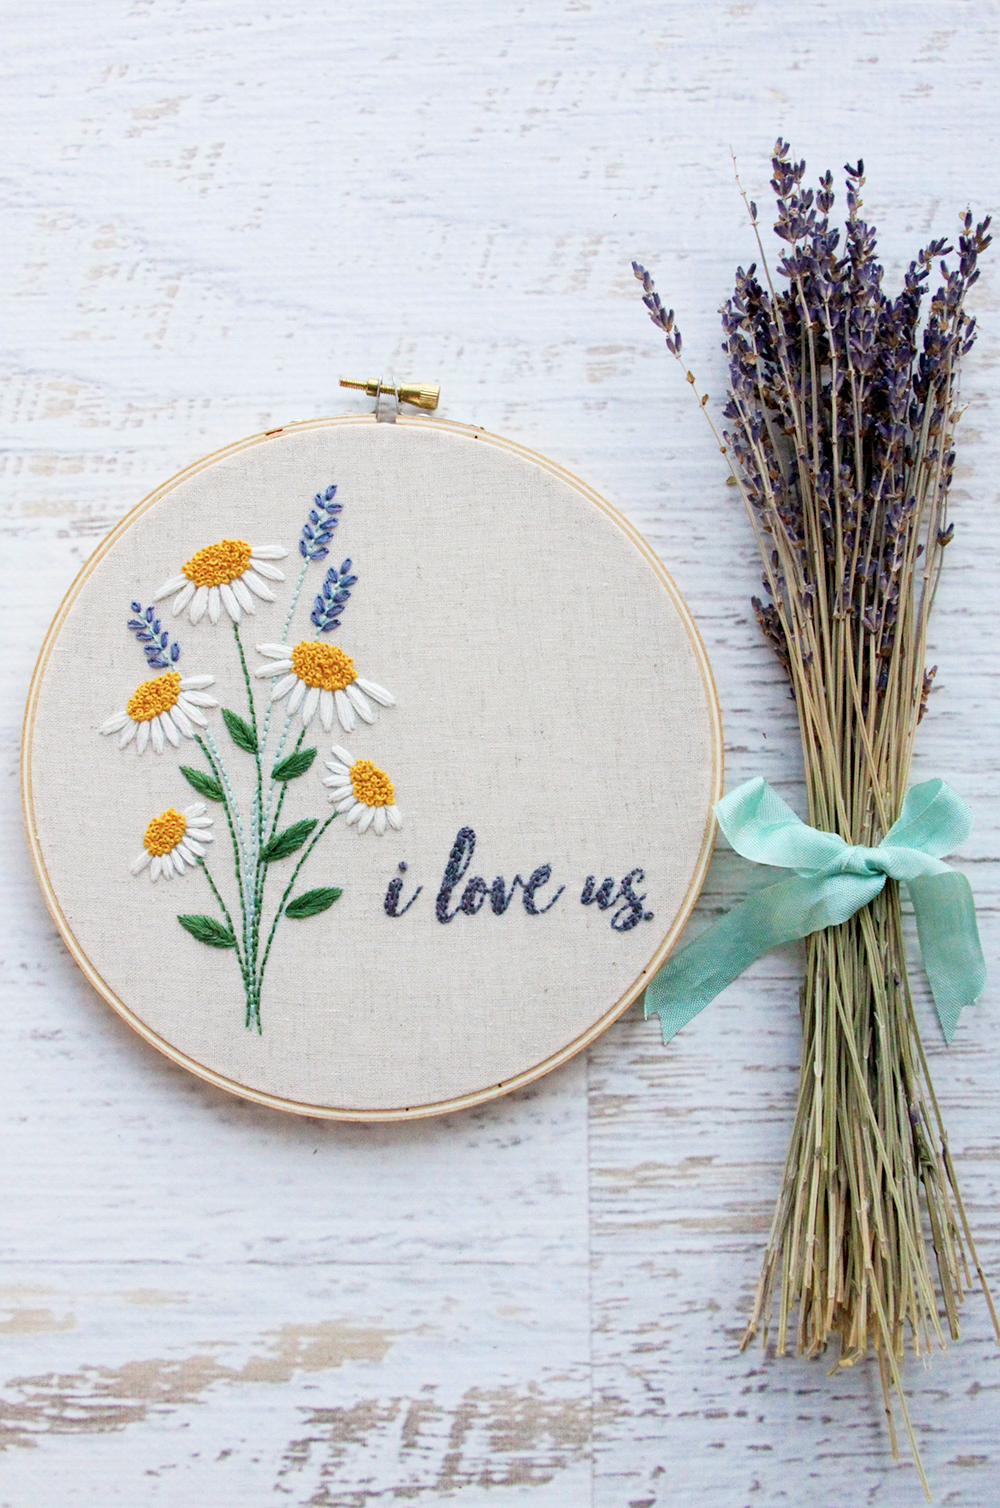 Heart Flowers - Version 2020 - Embroidery for Valentine, Wedding